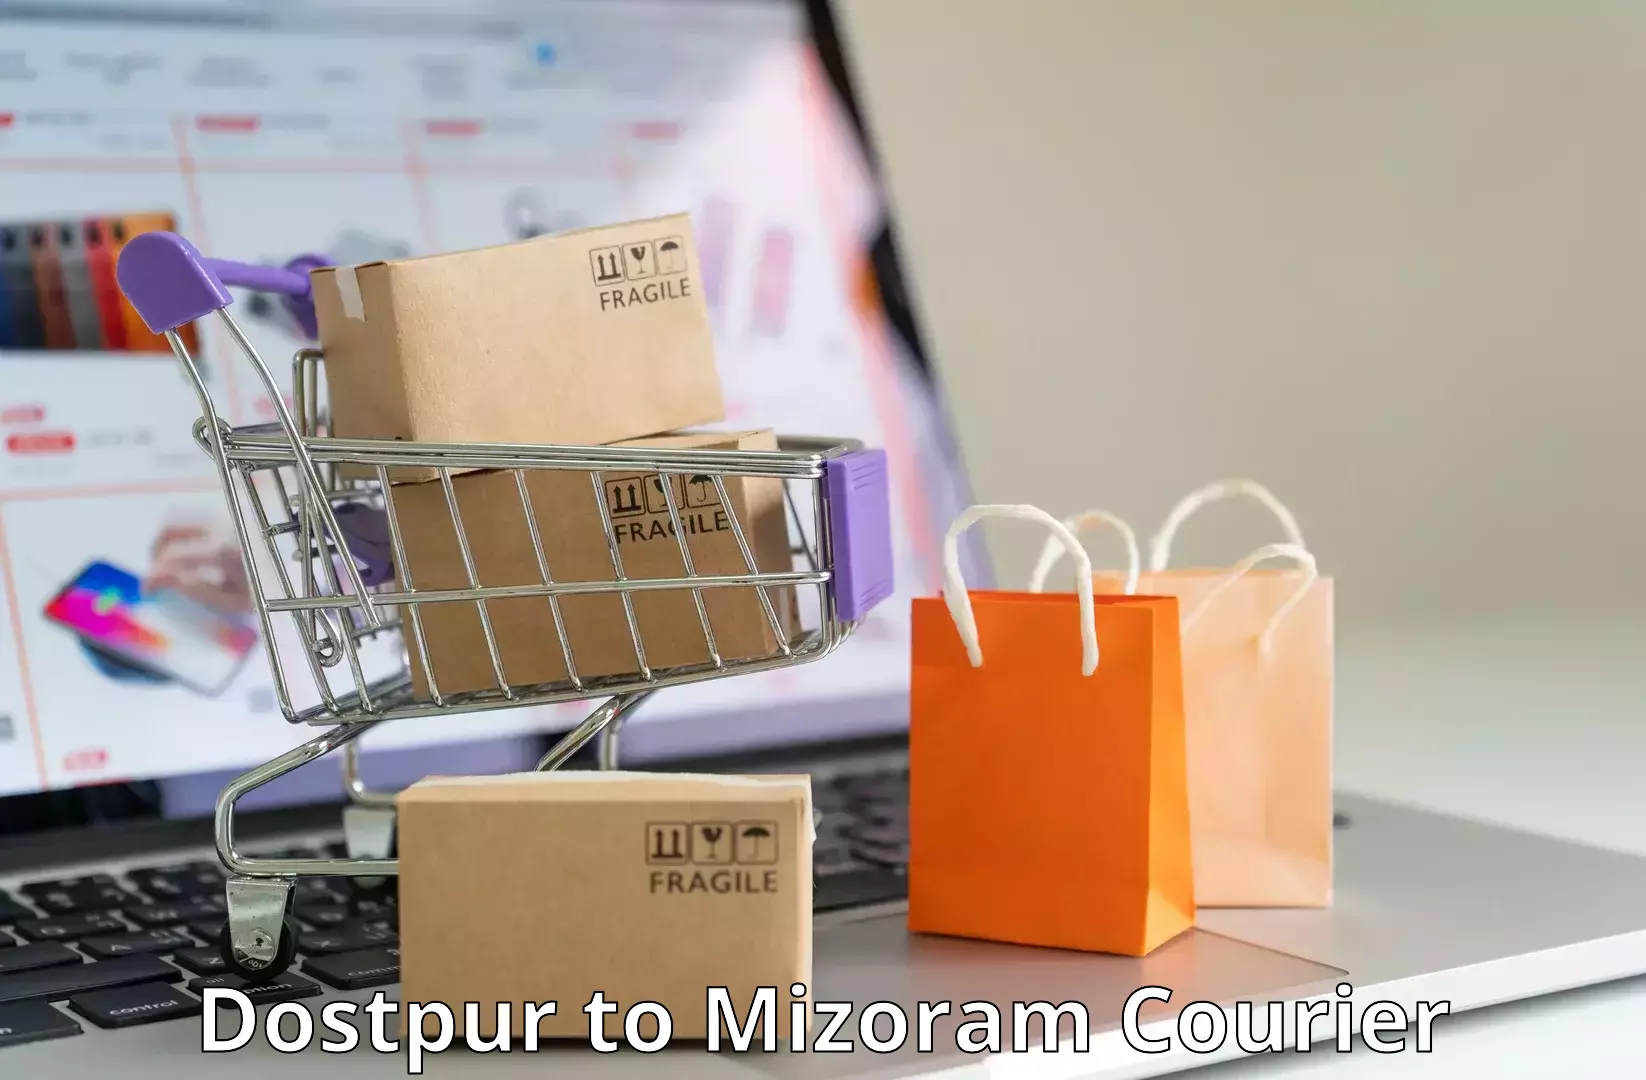 Nationwide courier service Dostpur to Mizoram